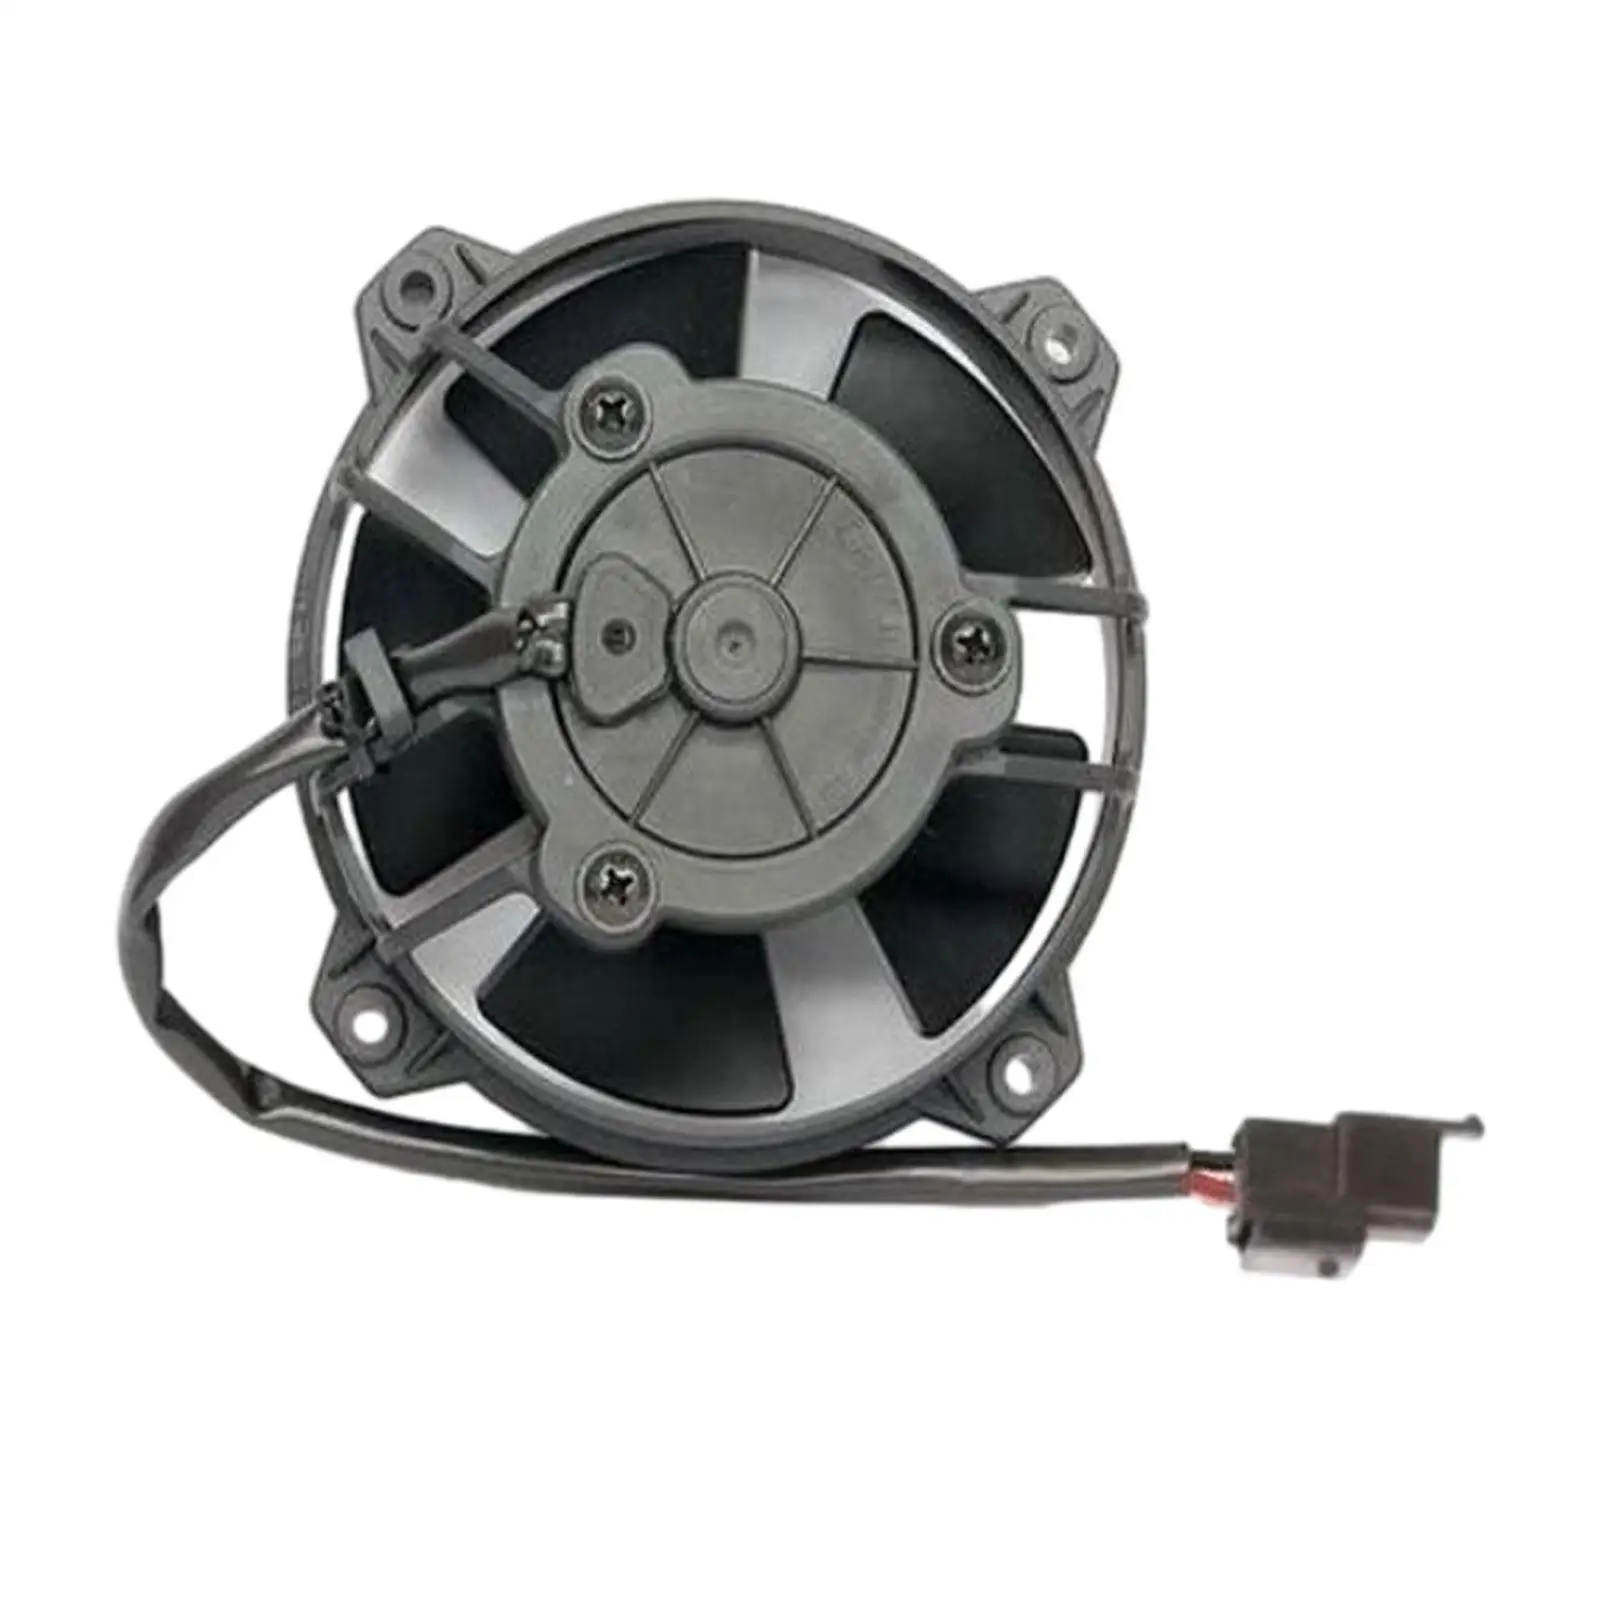 Paddle Blade Puller Fan 147 CFM 12 V 30103018 for VA32-a101-62A Repair High Professional Vehicle Repair Parts